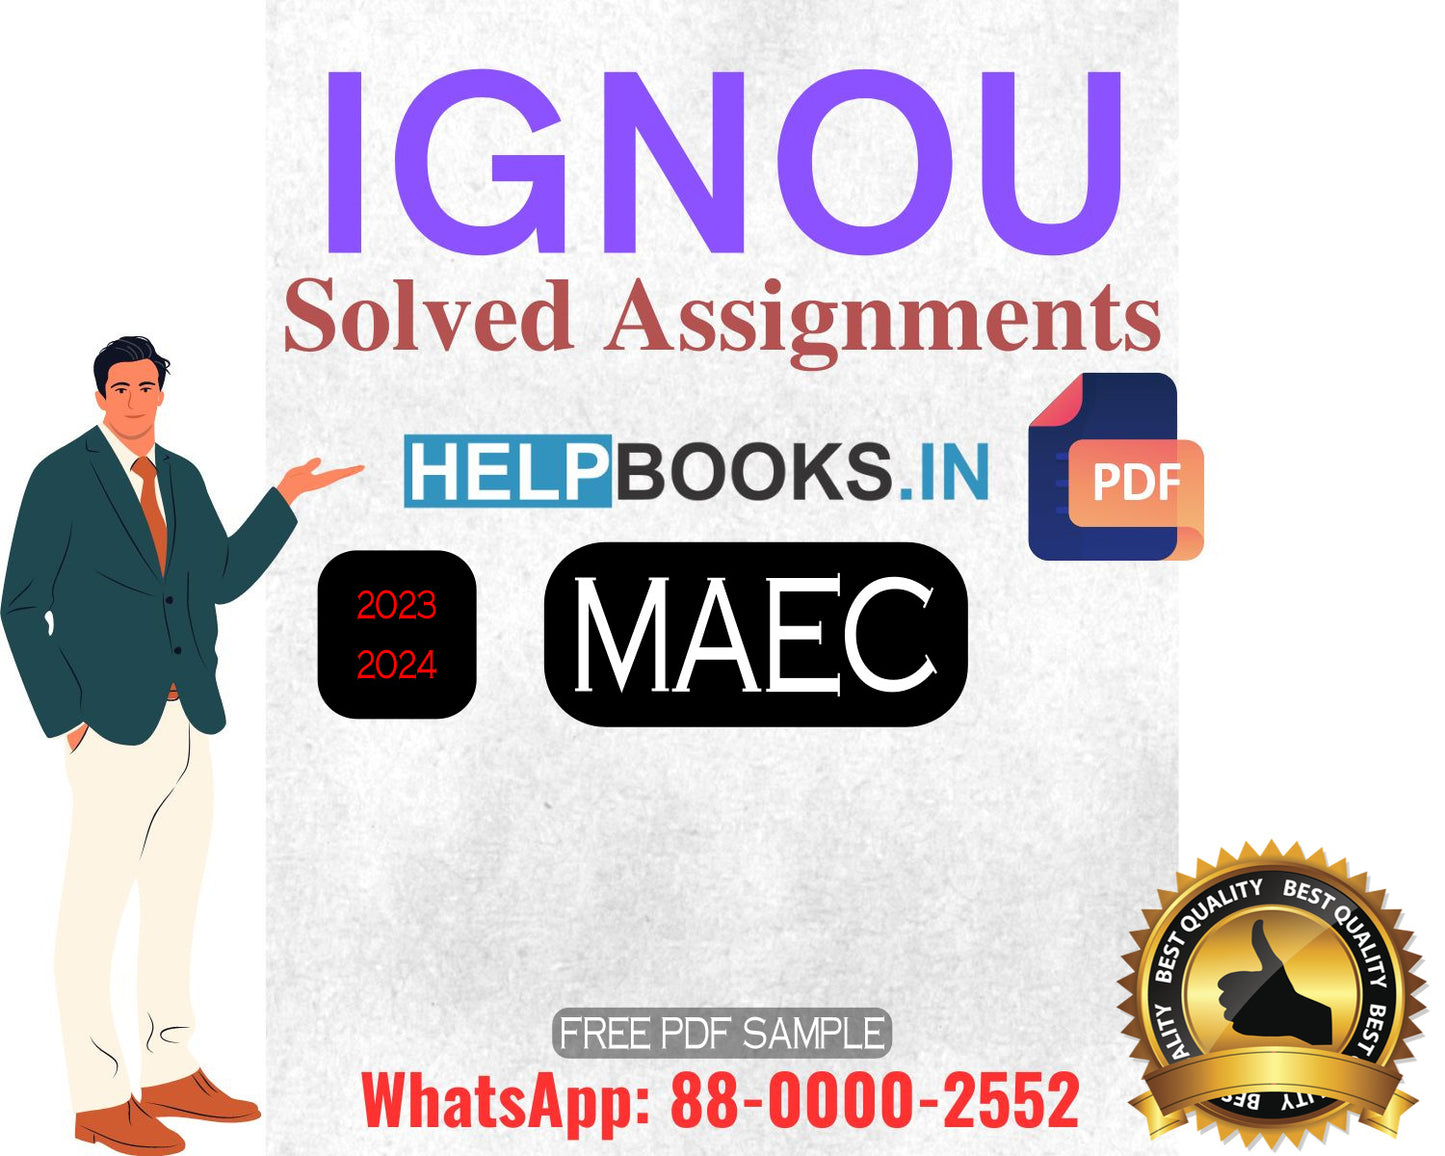 IGNOU Master's Degree Programme Latest IGNOU Solved Assignment 2023-24 & 2022-23 Sessions : MAEC Master of Arts Economics Solved Assignments